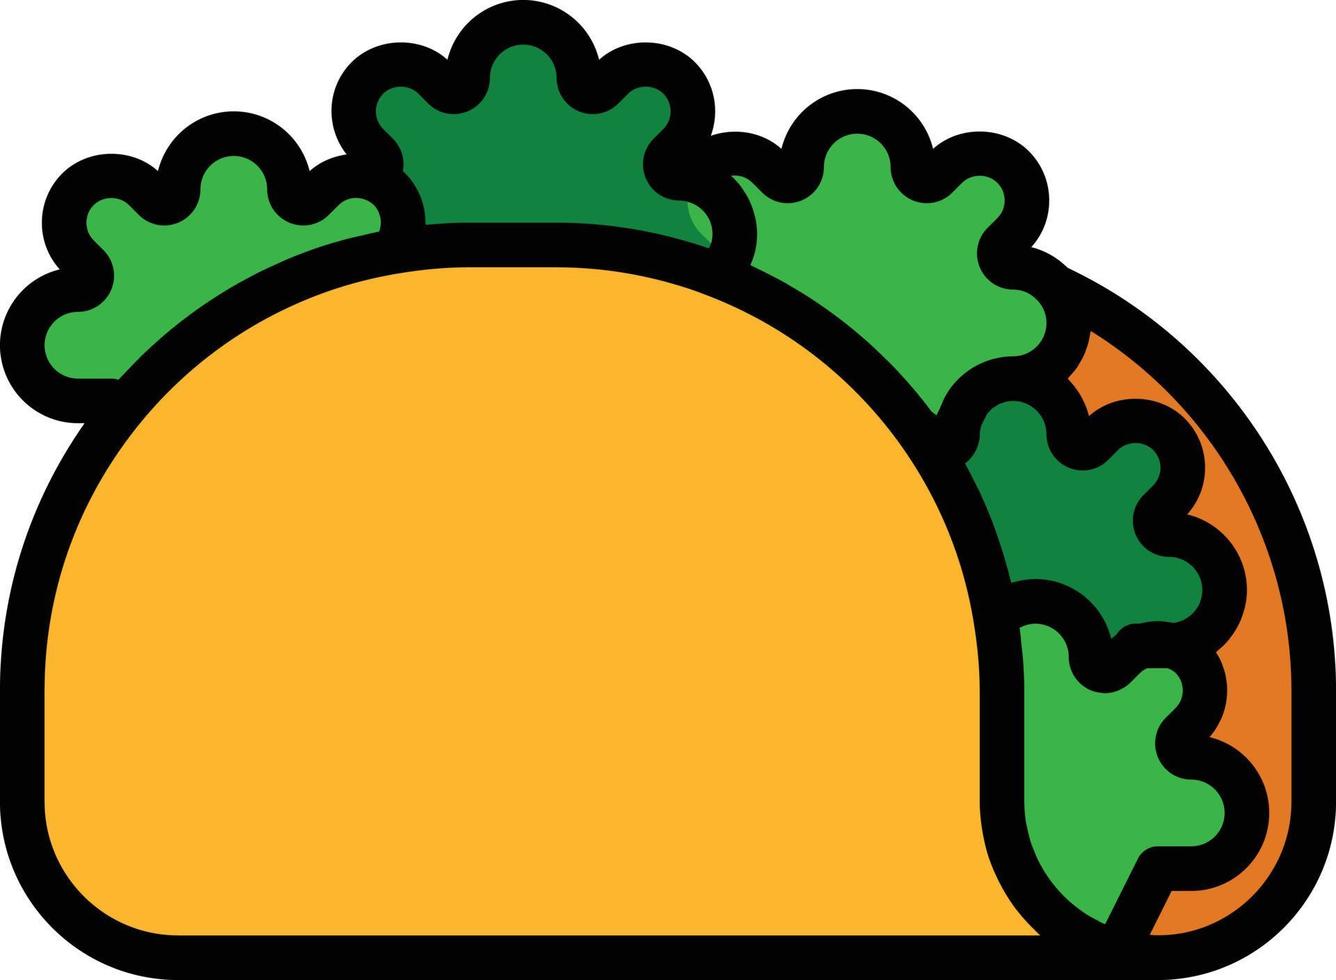 taco food fastfood meal - filled outline icon vector